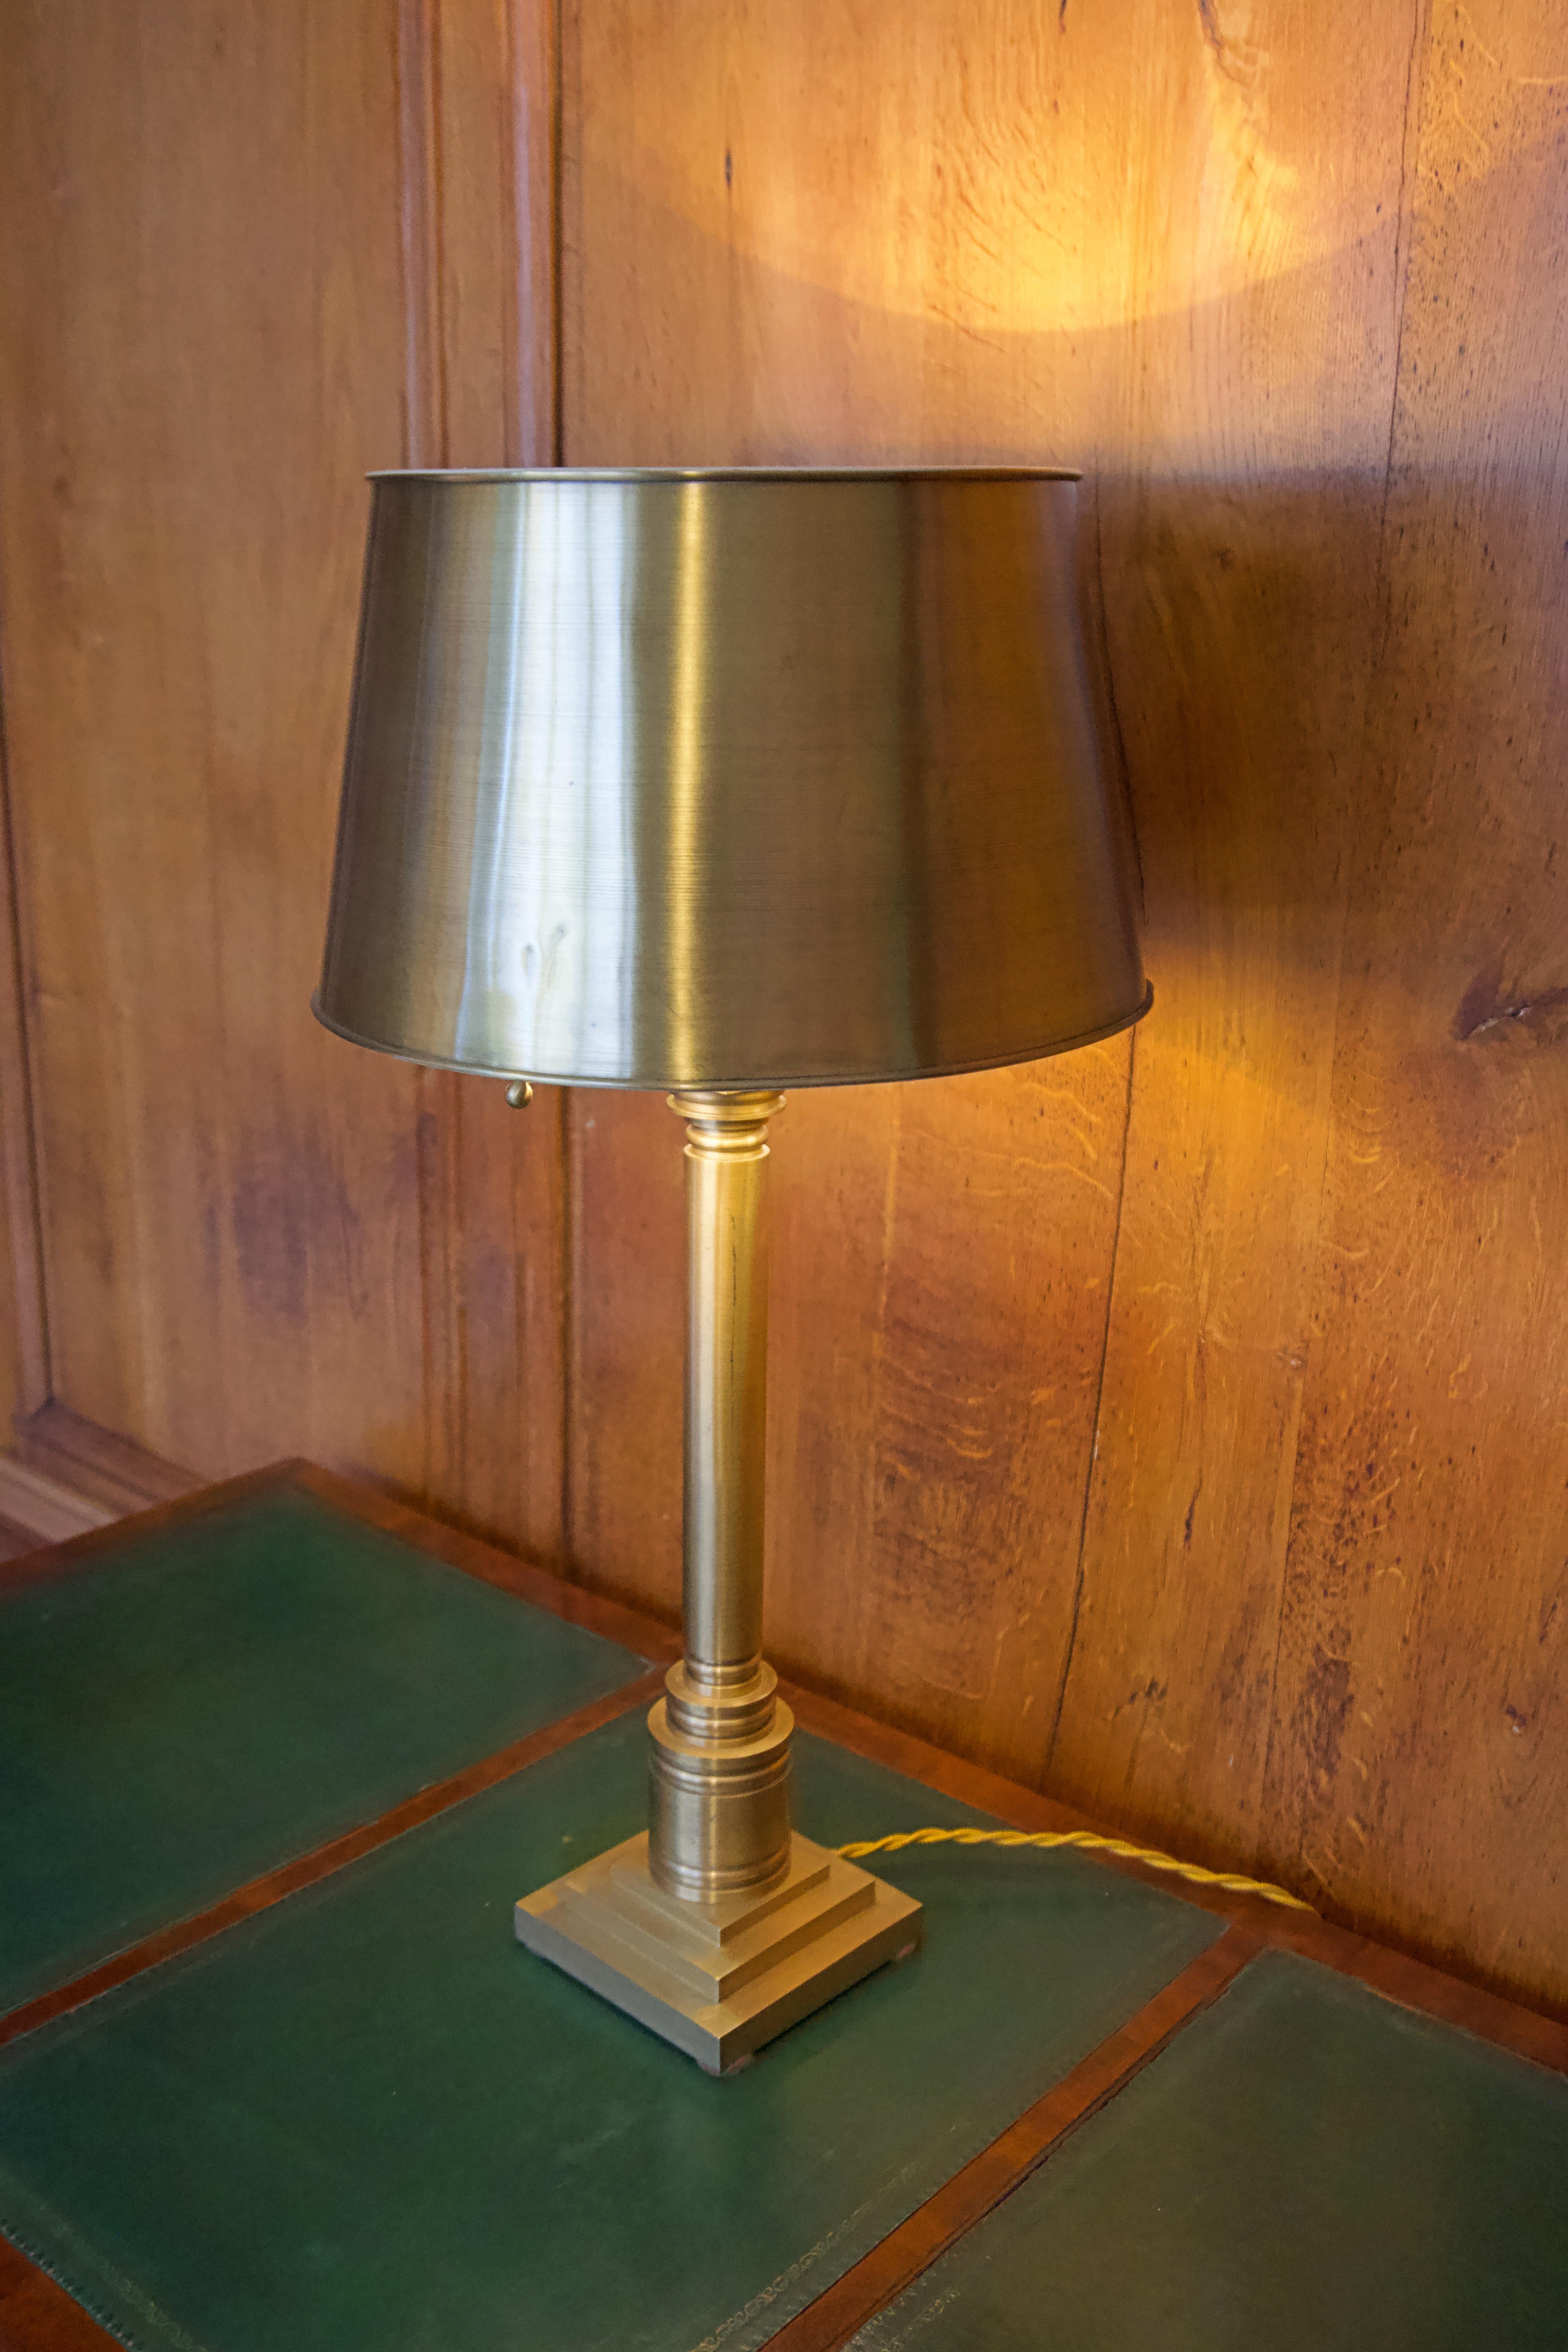 Brass lamp, new wiring (gold braided cord and brown switch),
having a solid brass base, turned brass stem and elements
with a brass shade with painted interior. All brass sealed against tarnish.